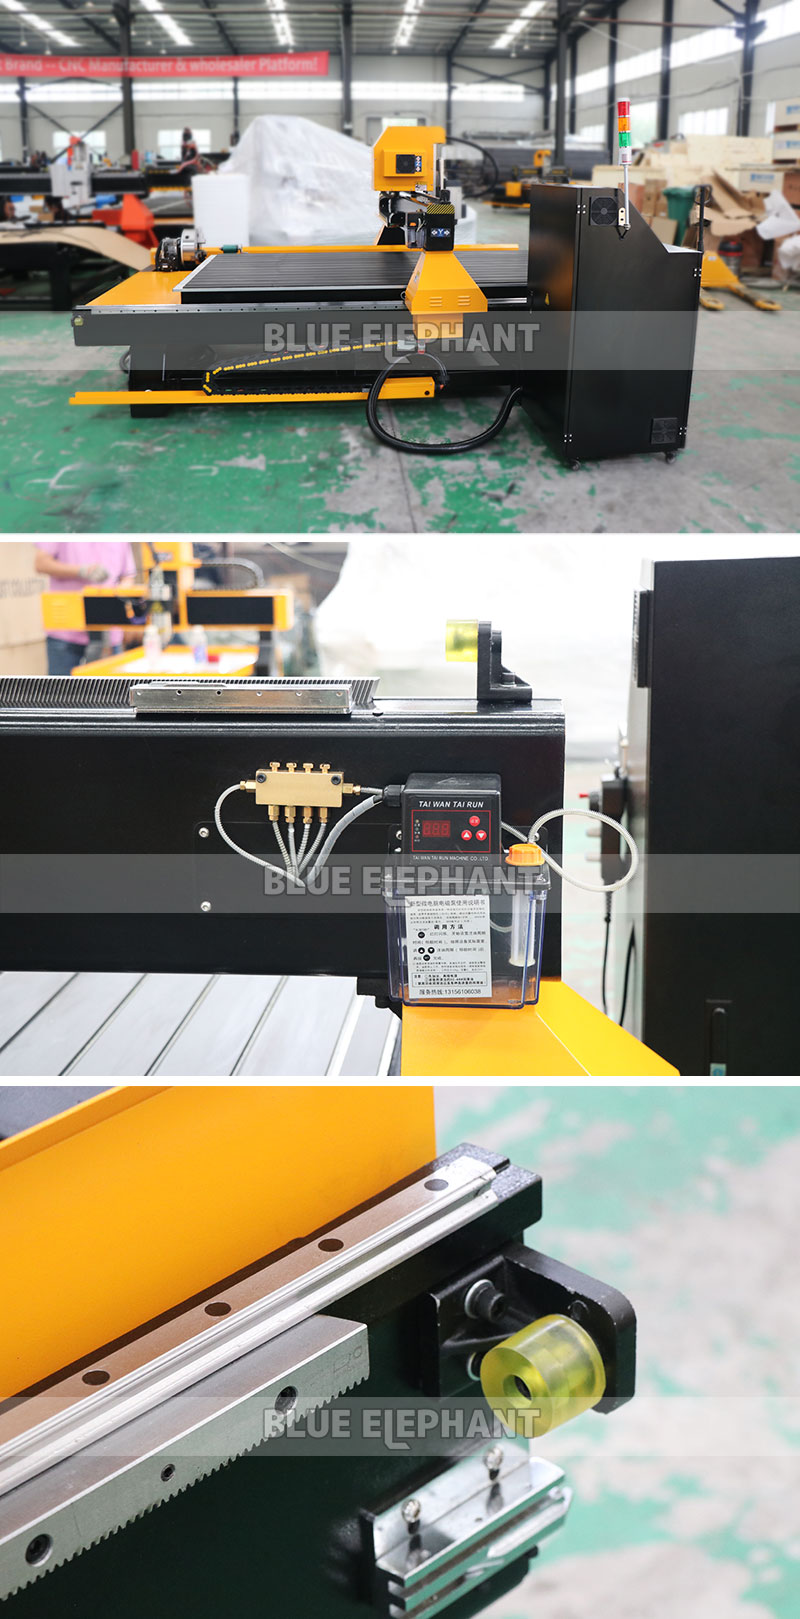 Hot Sale Low Price 4 axis cnc wood router for joinery company who specializes in making bespoke wooden windows and doors